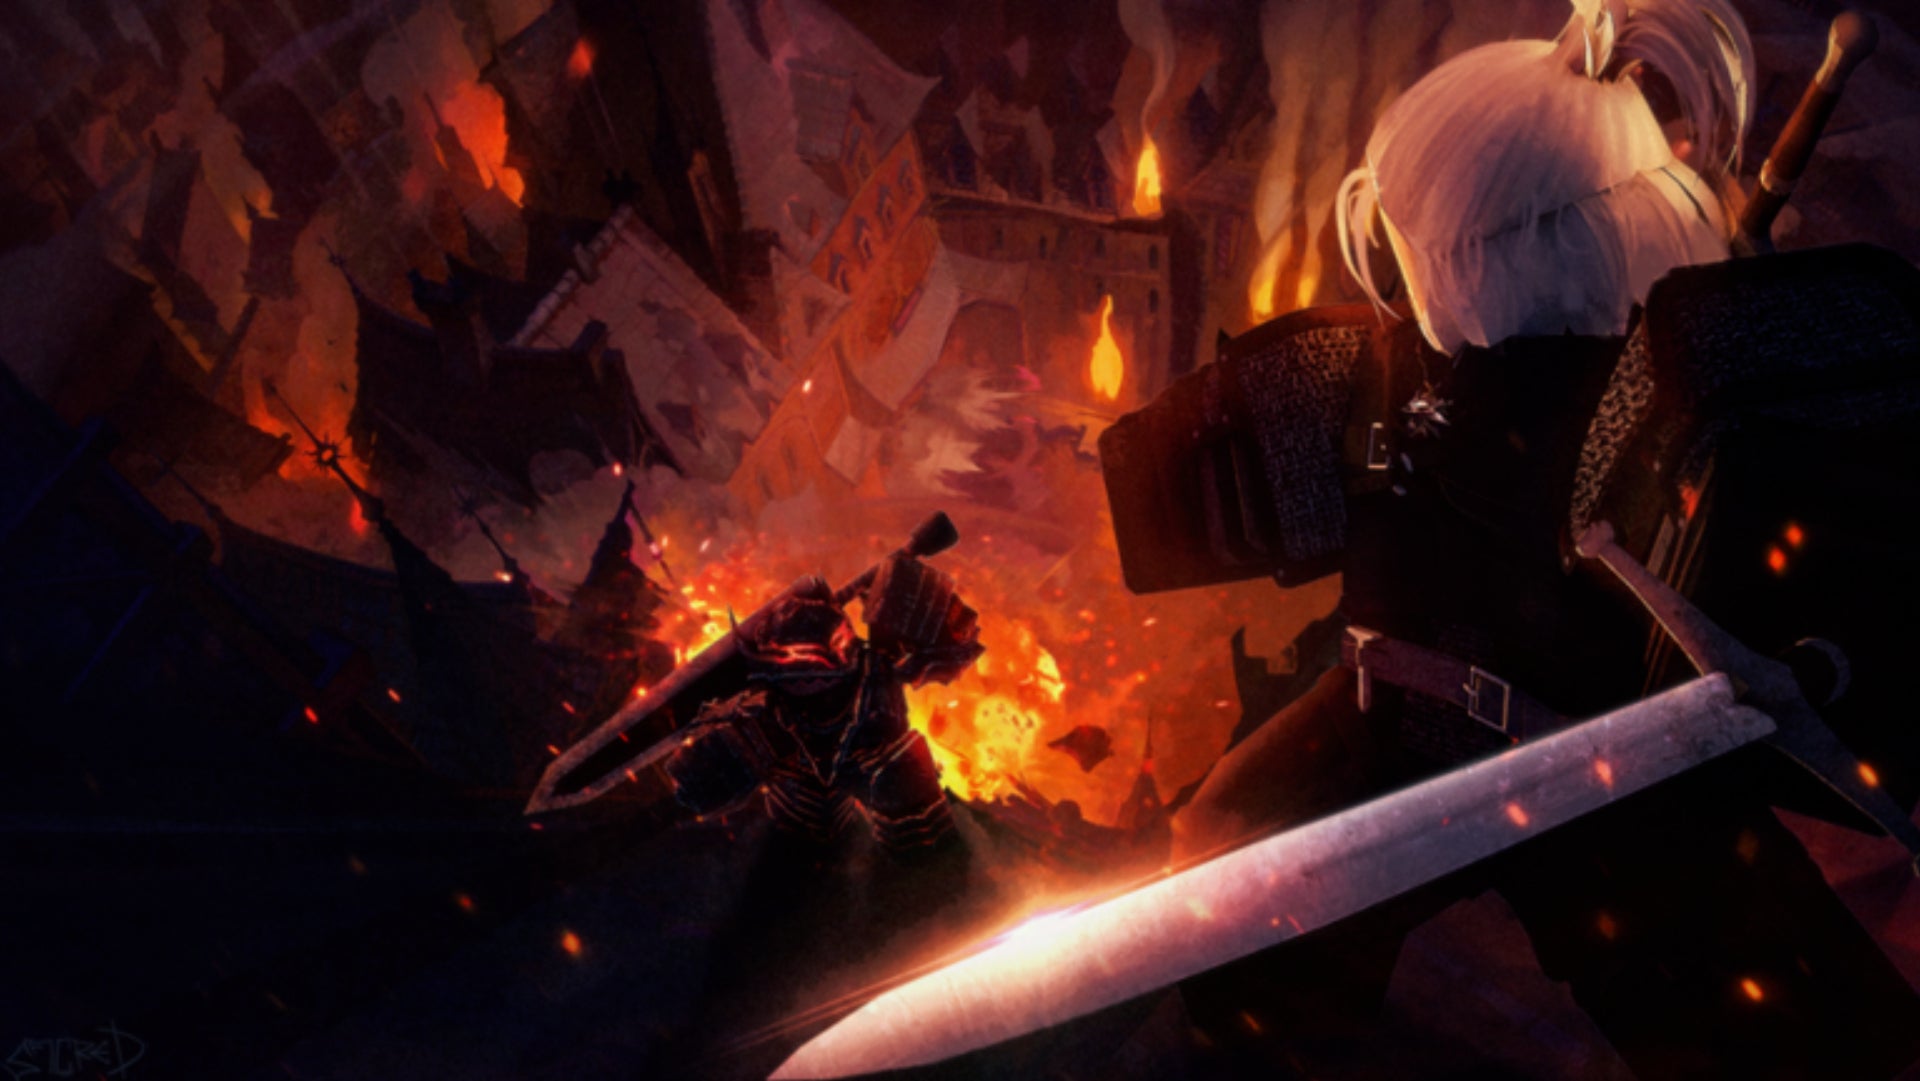 Roblox Combat Warriors official art, a warrior-like figure is standing with their back to the screen on the right side of the image. They are holding a sword and looking into a hole filled with Lava.